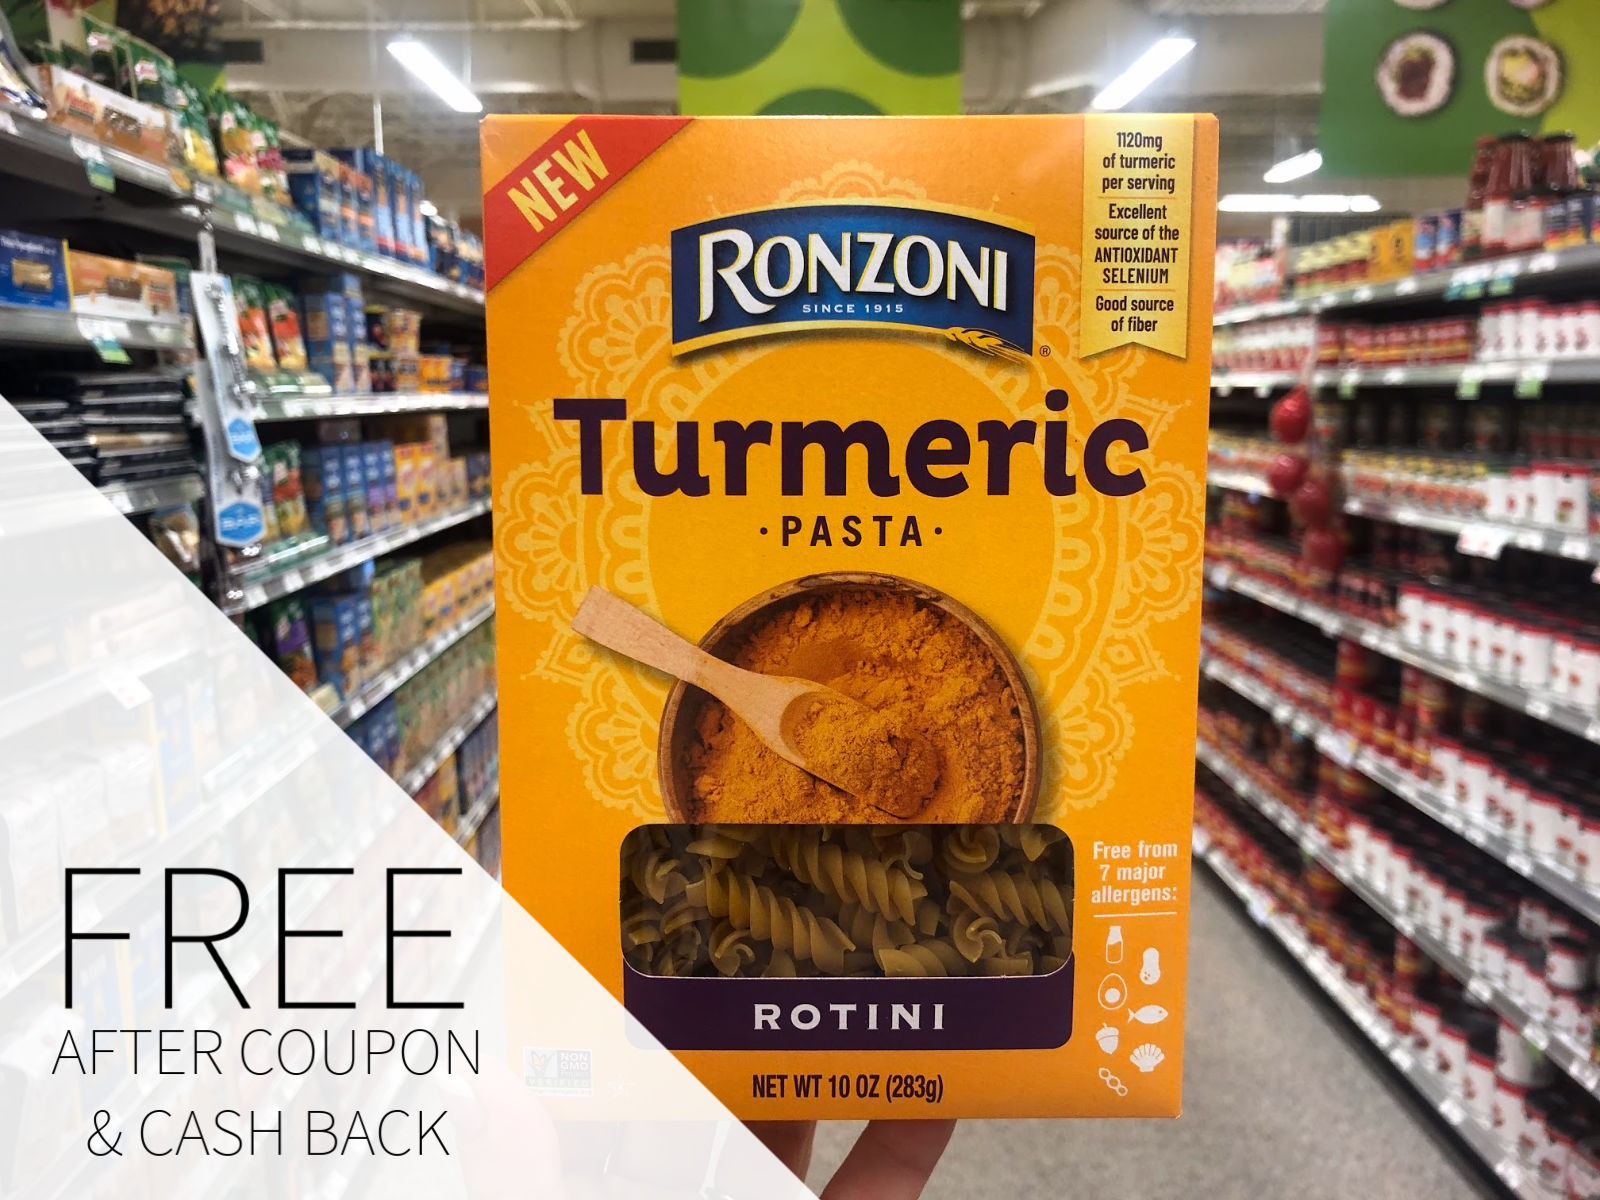 Get New Ronzoni Pasta For As Low As 25¢ At Publix - Try My Butter Chicken With Turmeric Pasta on I Heart Publix 1